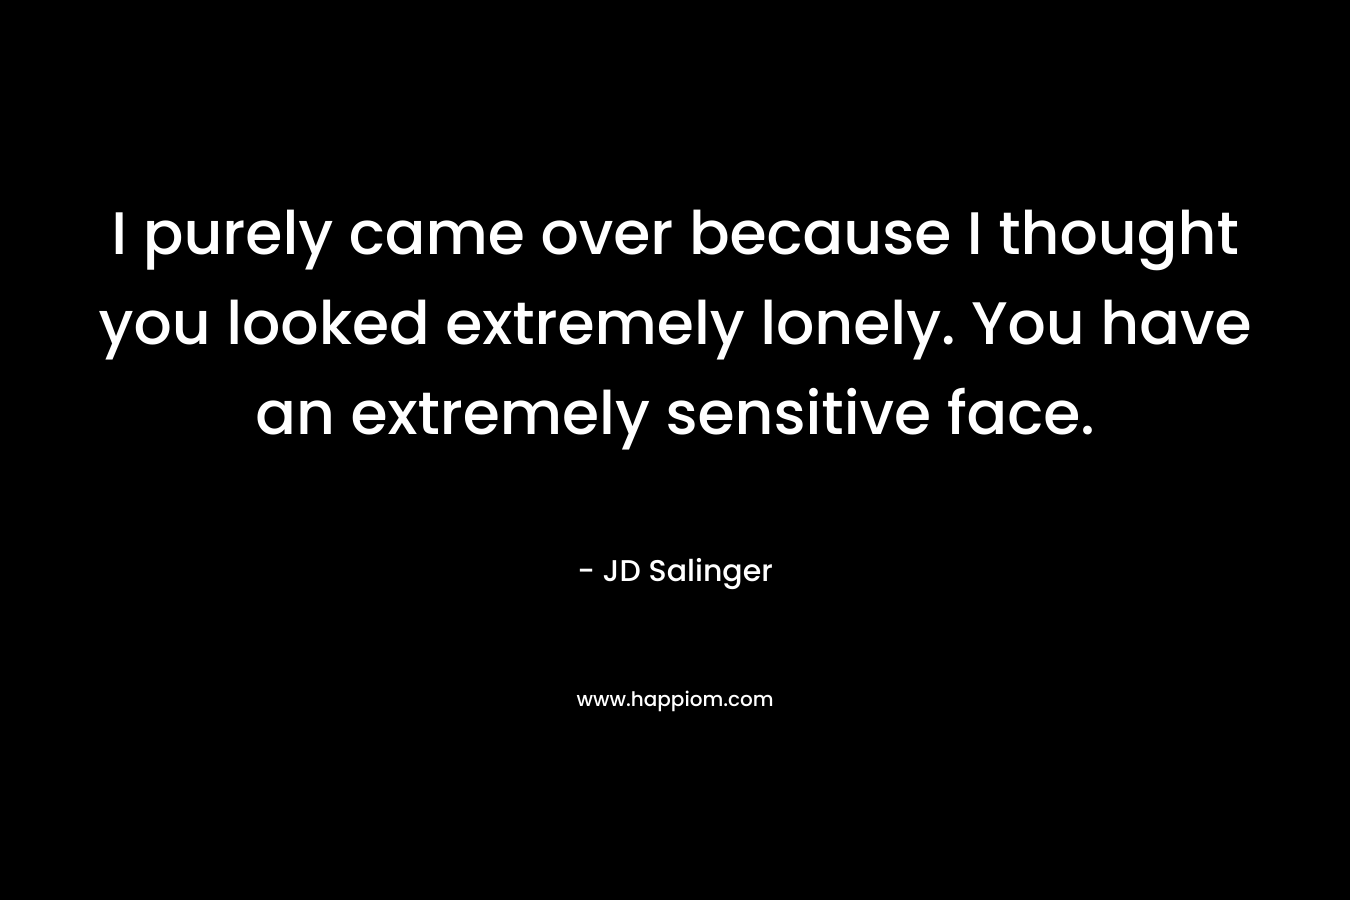 I purely came over because I thought you looked extremely lonely. You have an extremely sensitive face.